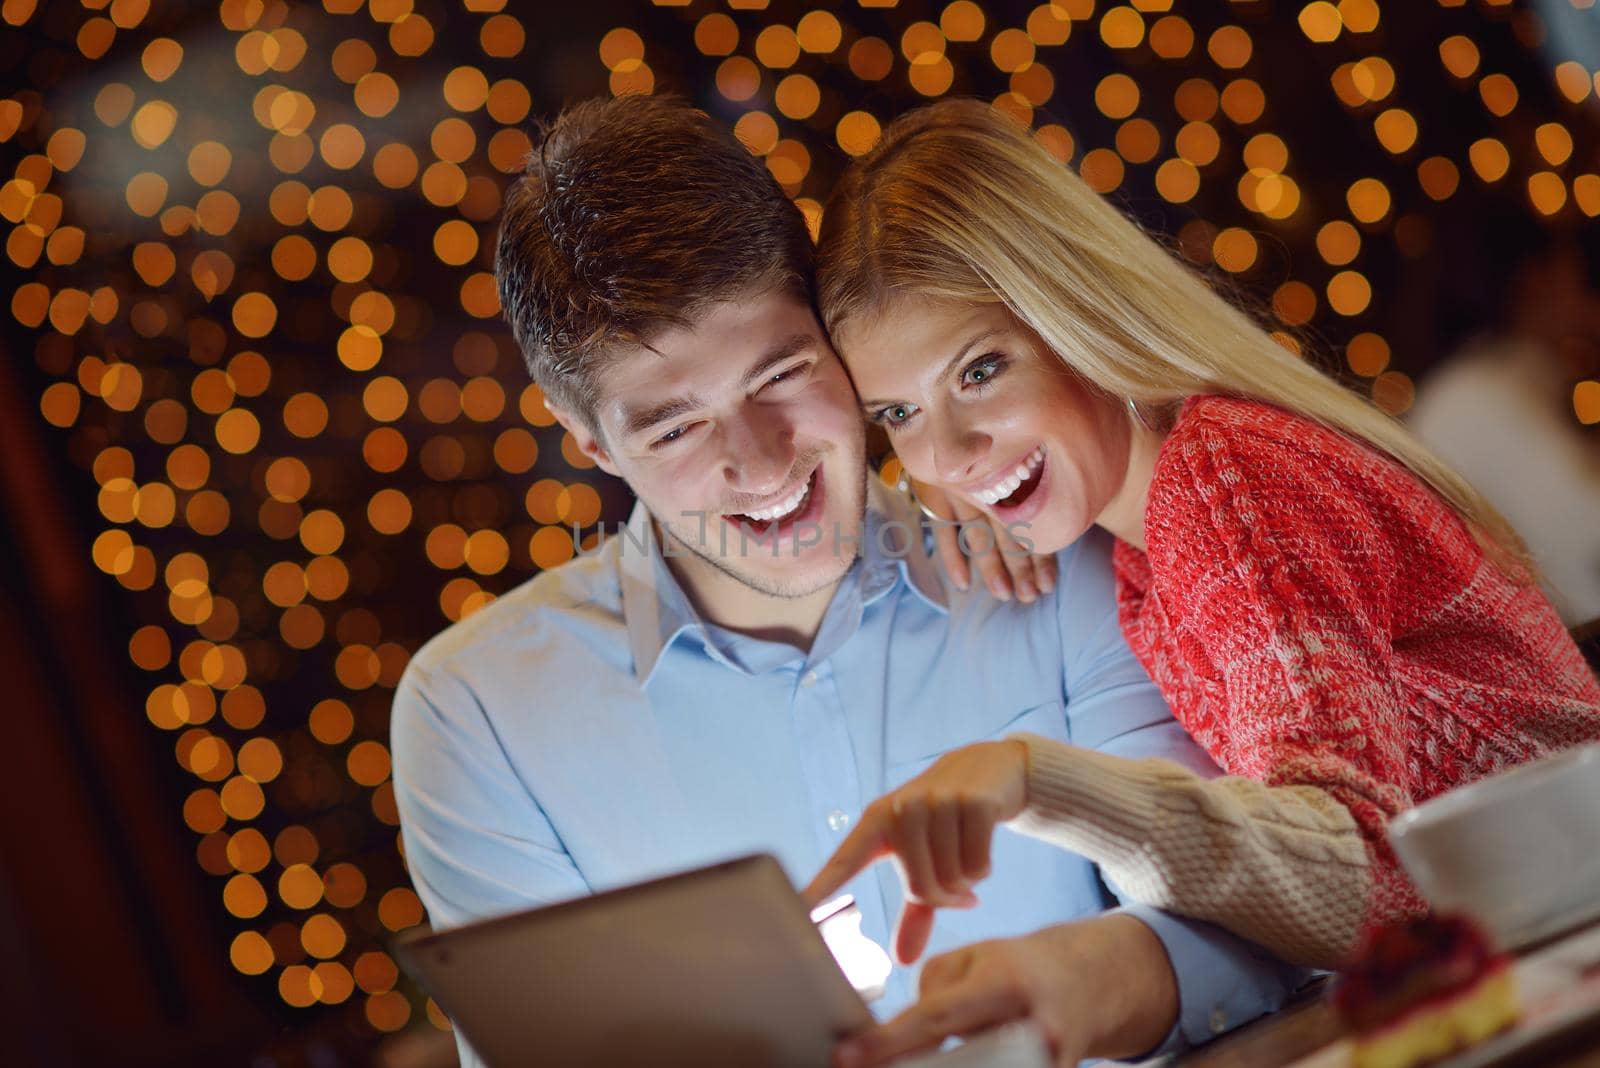 happy young couple with a tablet computer in restaurant